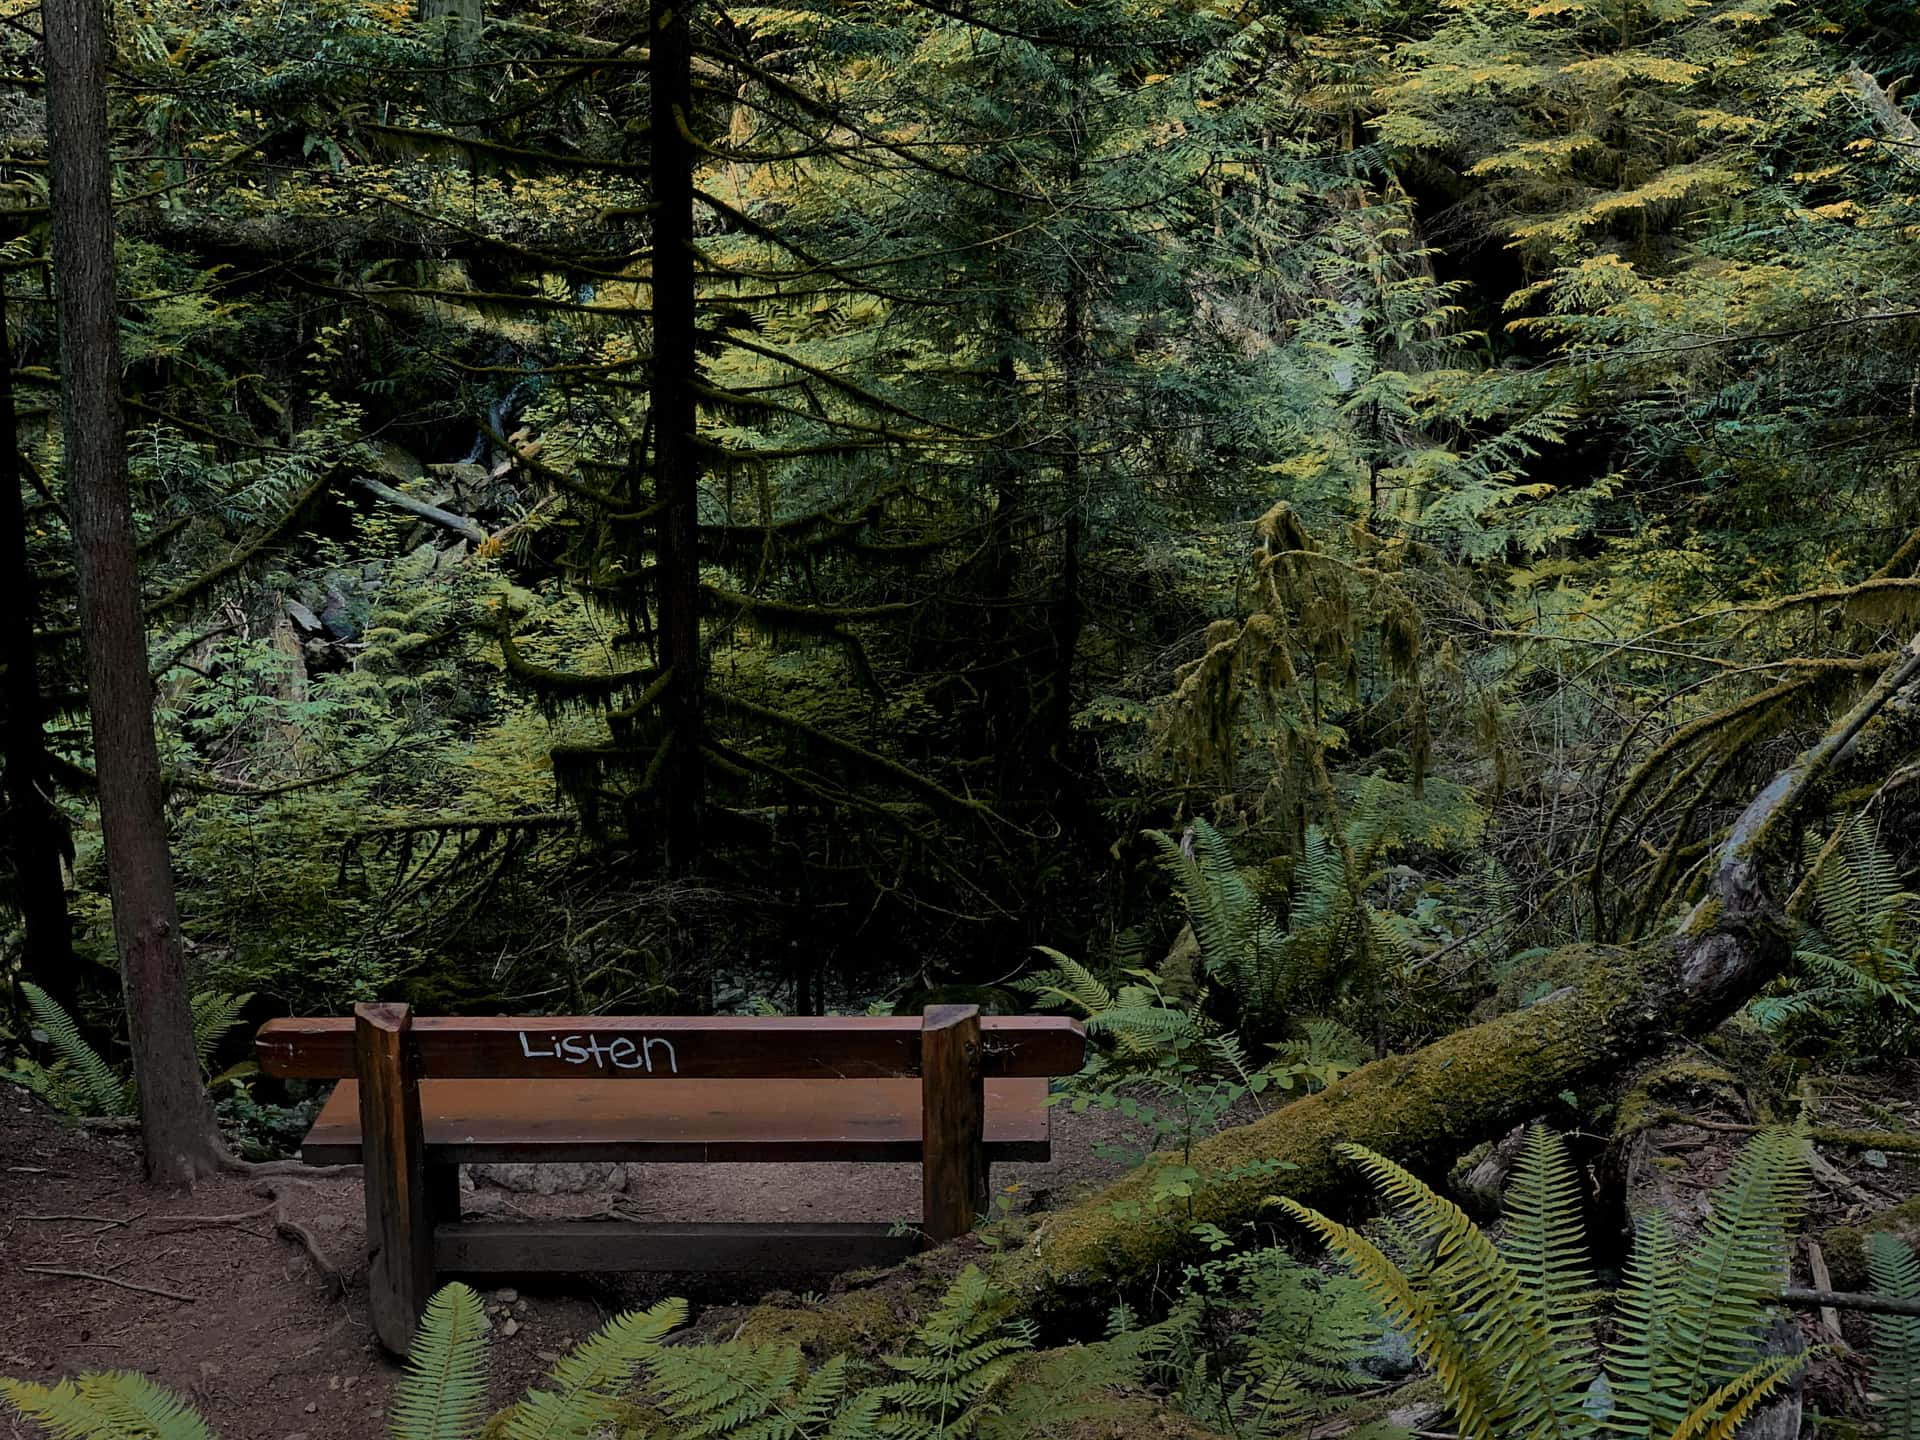 bench in a forest with graffiti reading “Listen”